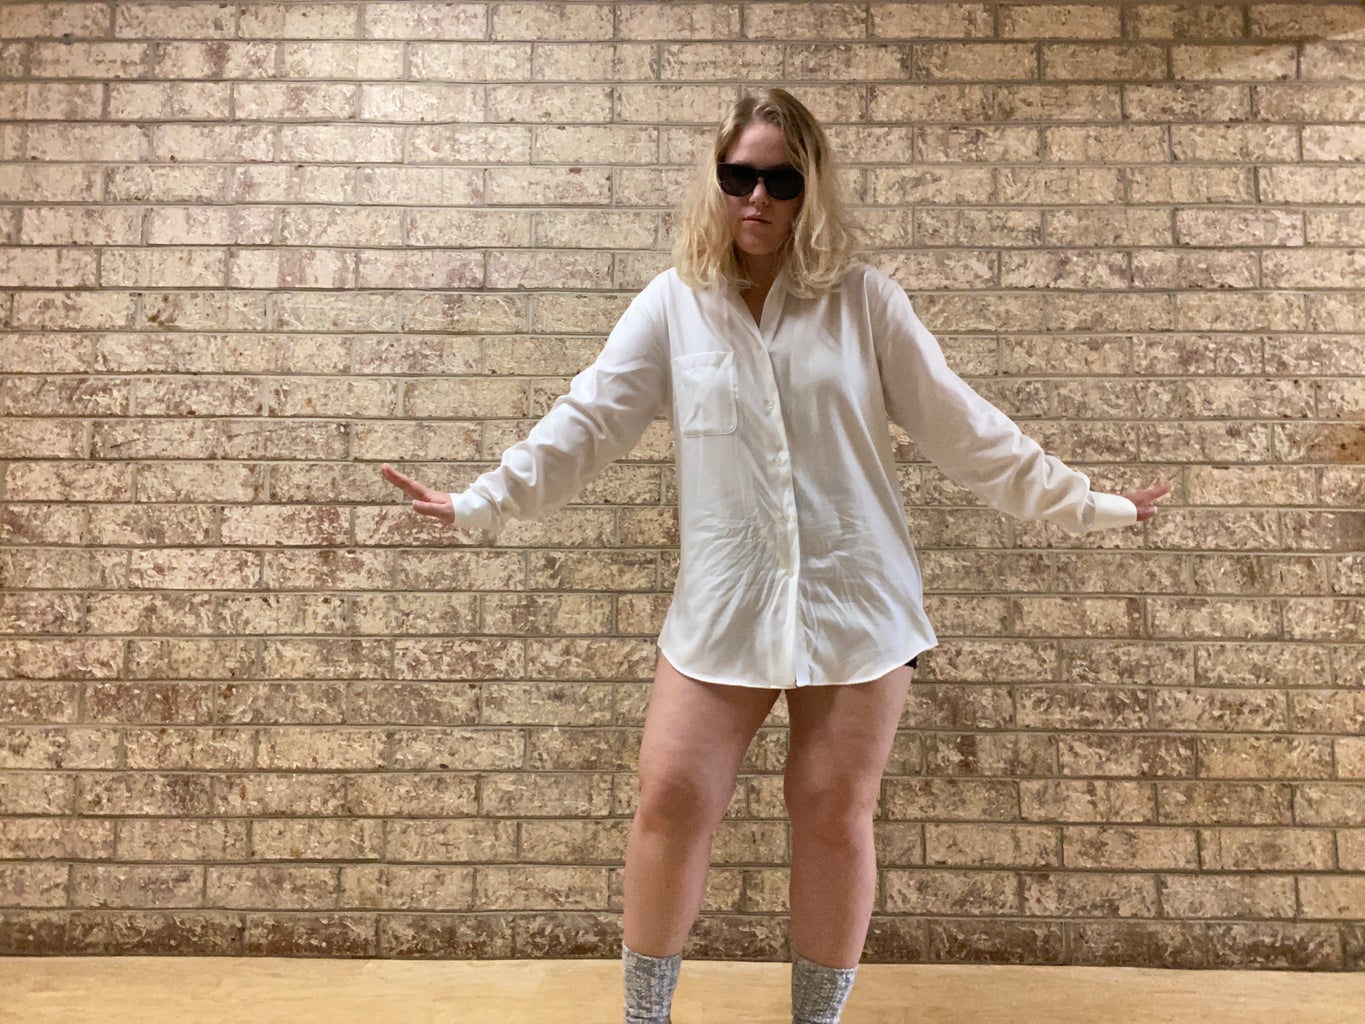 My costume for Risky Business movie